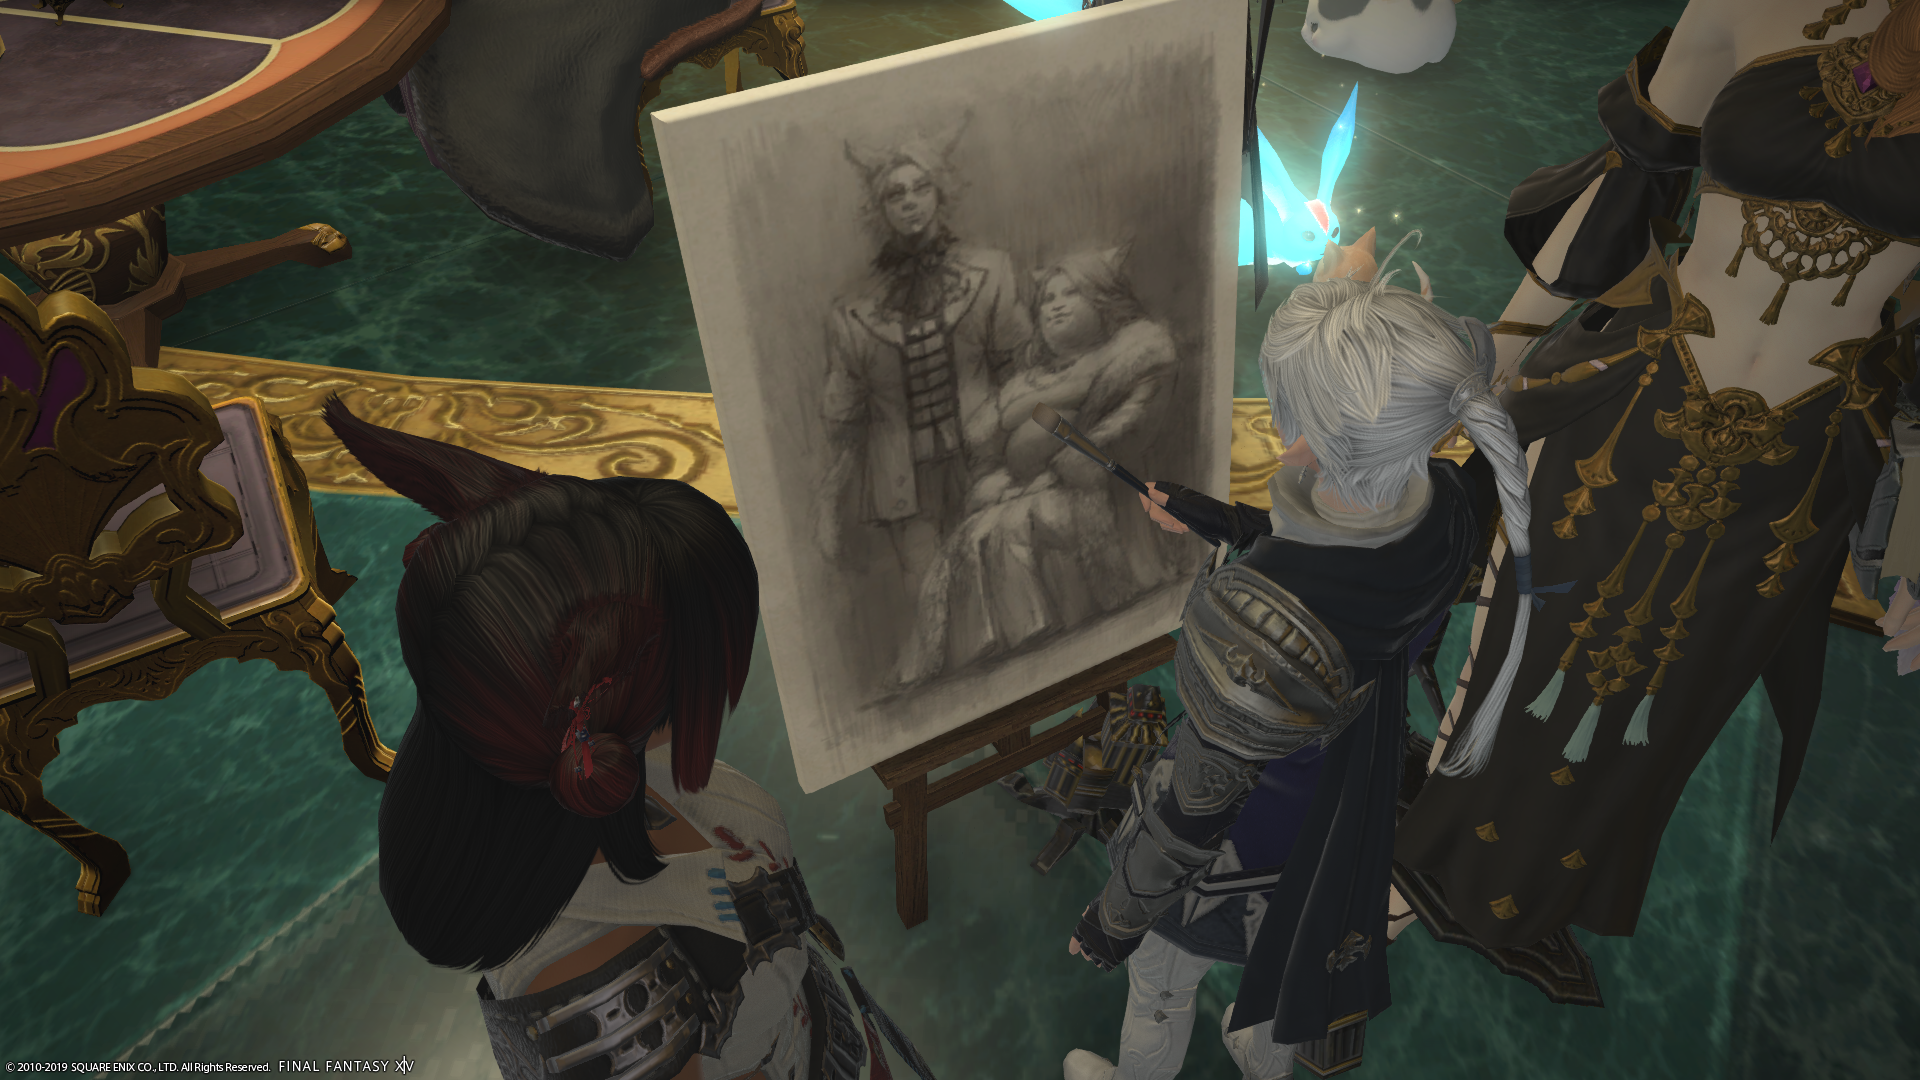 Alphinaud sketching a portrait of two miqo'te, the Chais: Chai-Nuzz standing next to Dulia-Chai sitting.